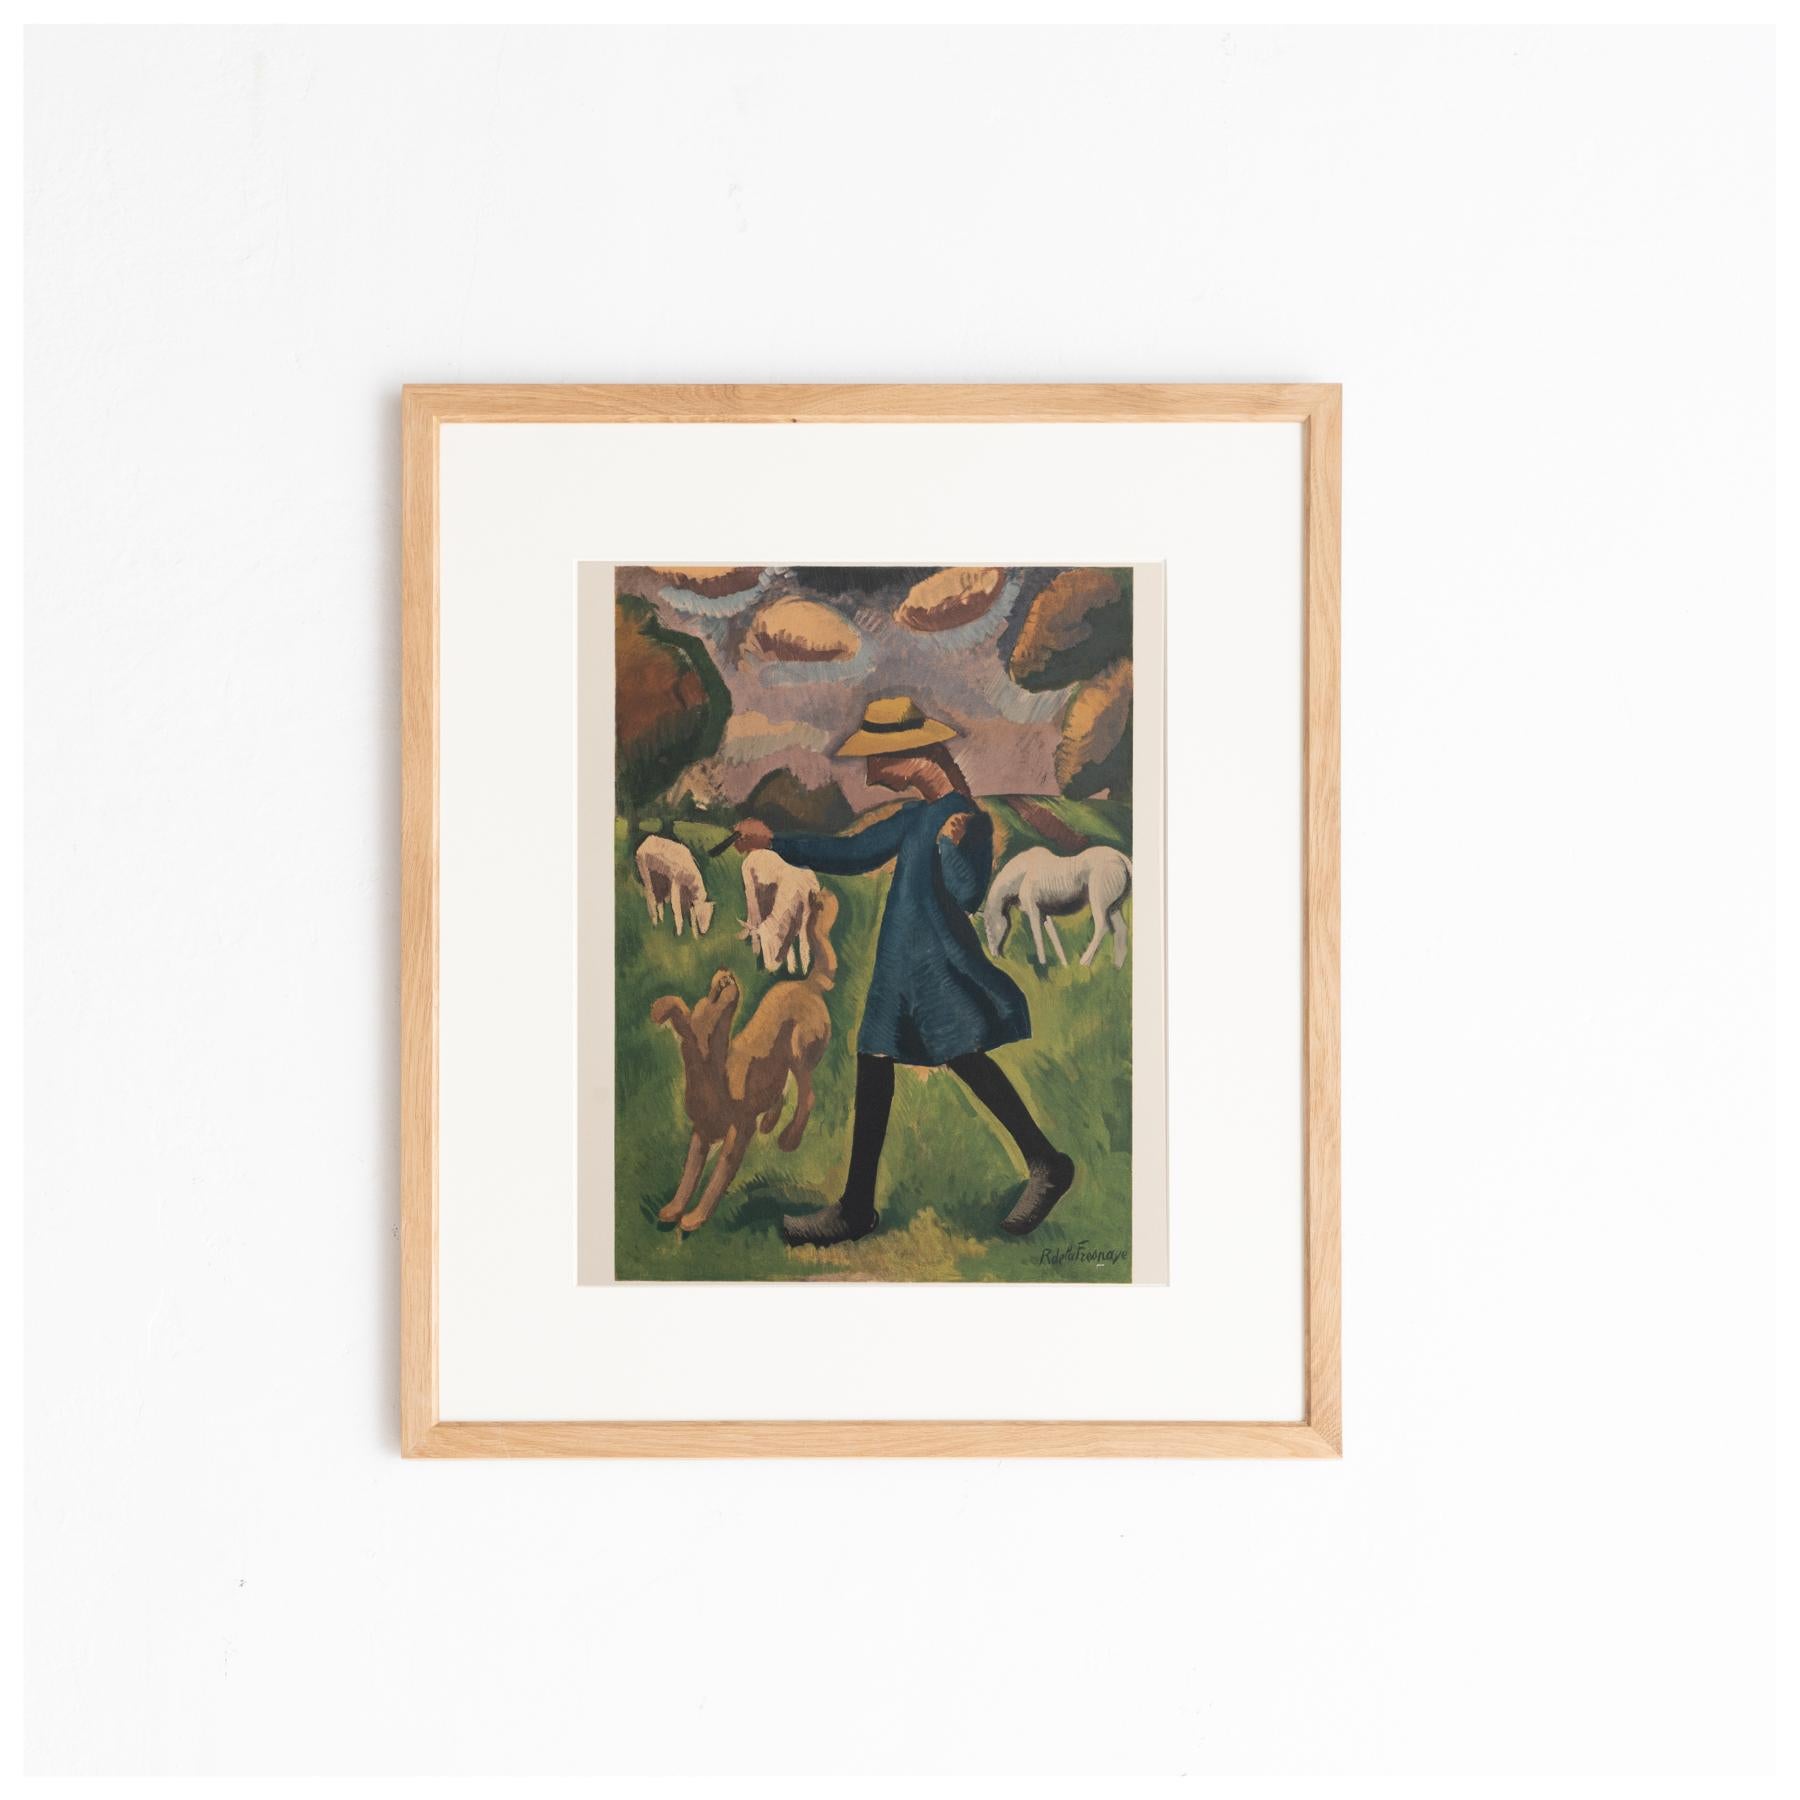 Original color lithograph 'La gardeuse de moutons' by Roger de la Fresnaye.

Lithograph printed from an original painting made by the author in France, circa 1909.

Published in France by Fernand Mourlot, circa 1968. 

Framed and signed in the